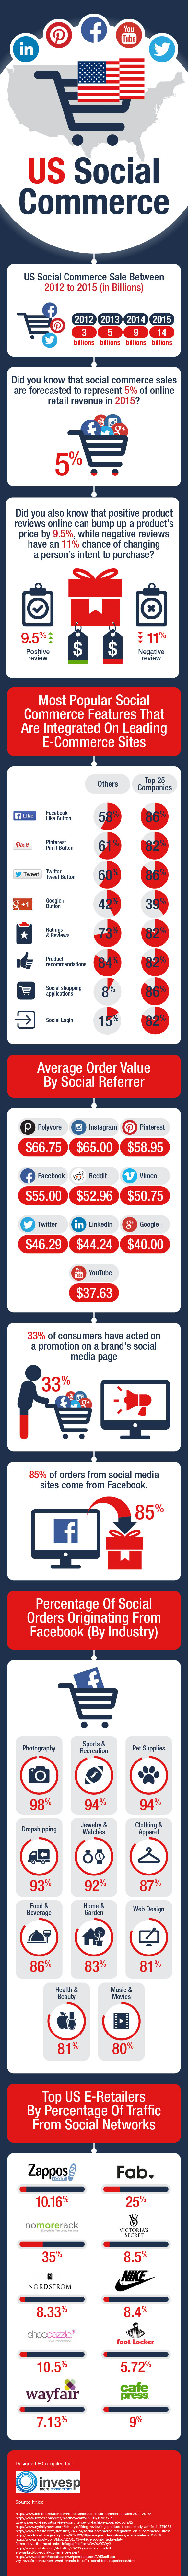 United States Social Commerce [infographic]